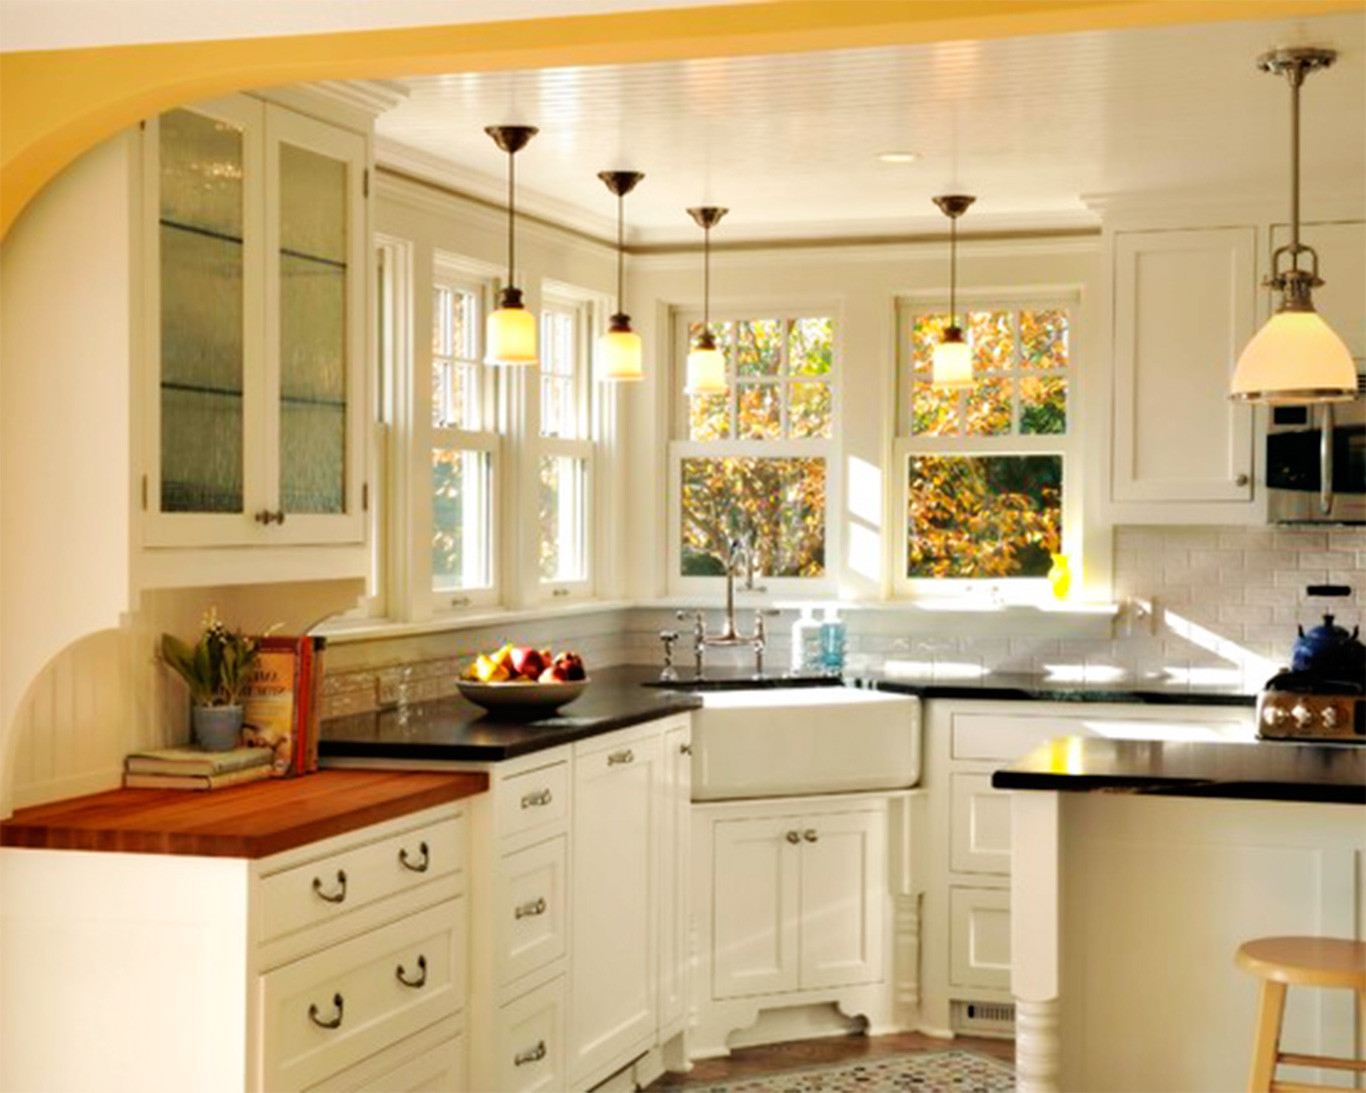 Kitchen Sink And Cabinets
 Advantages and disadvantages of corner kitchen sinks